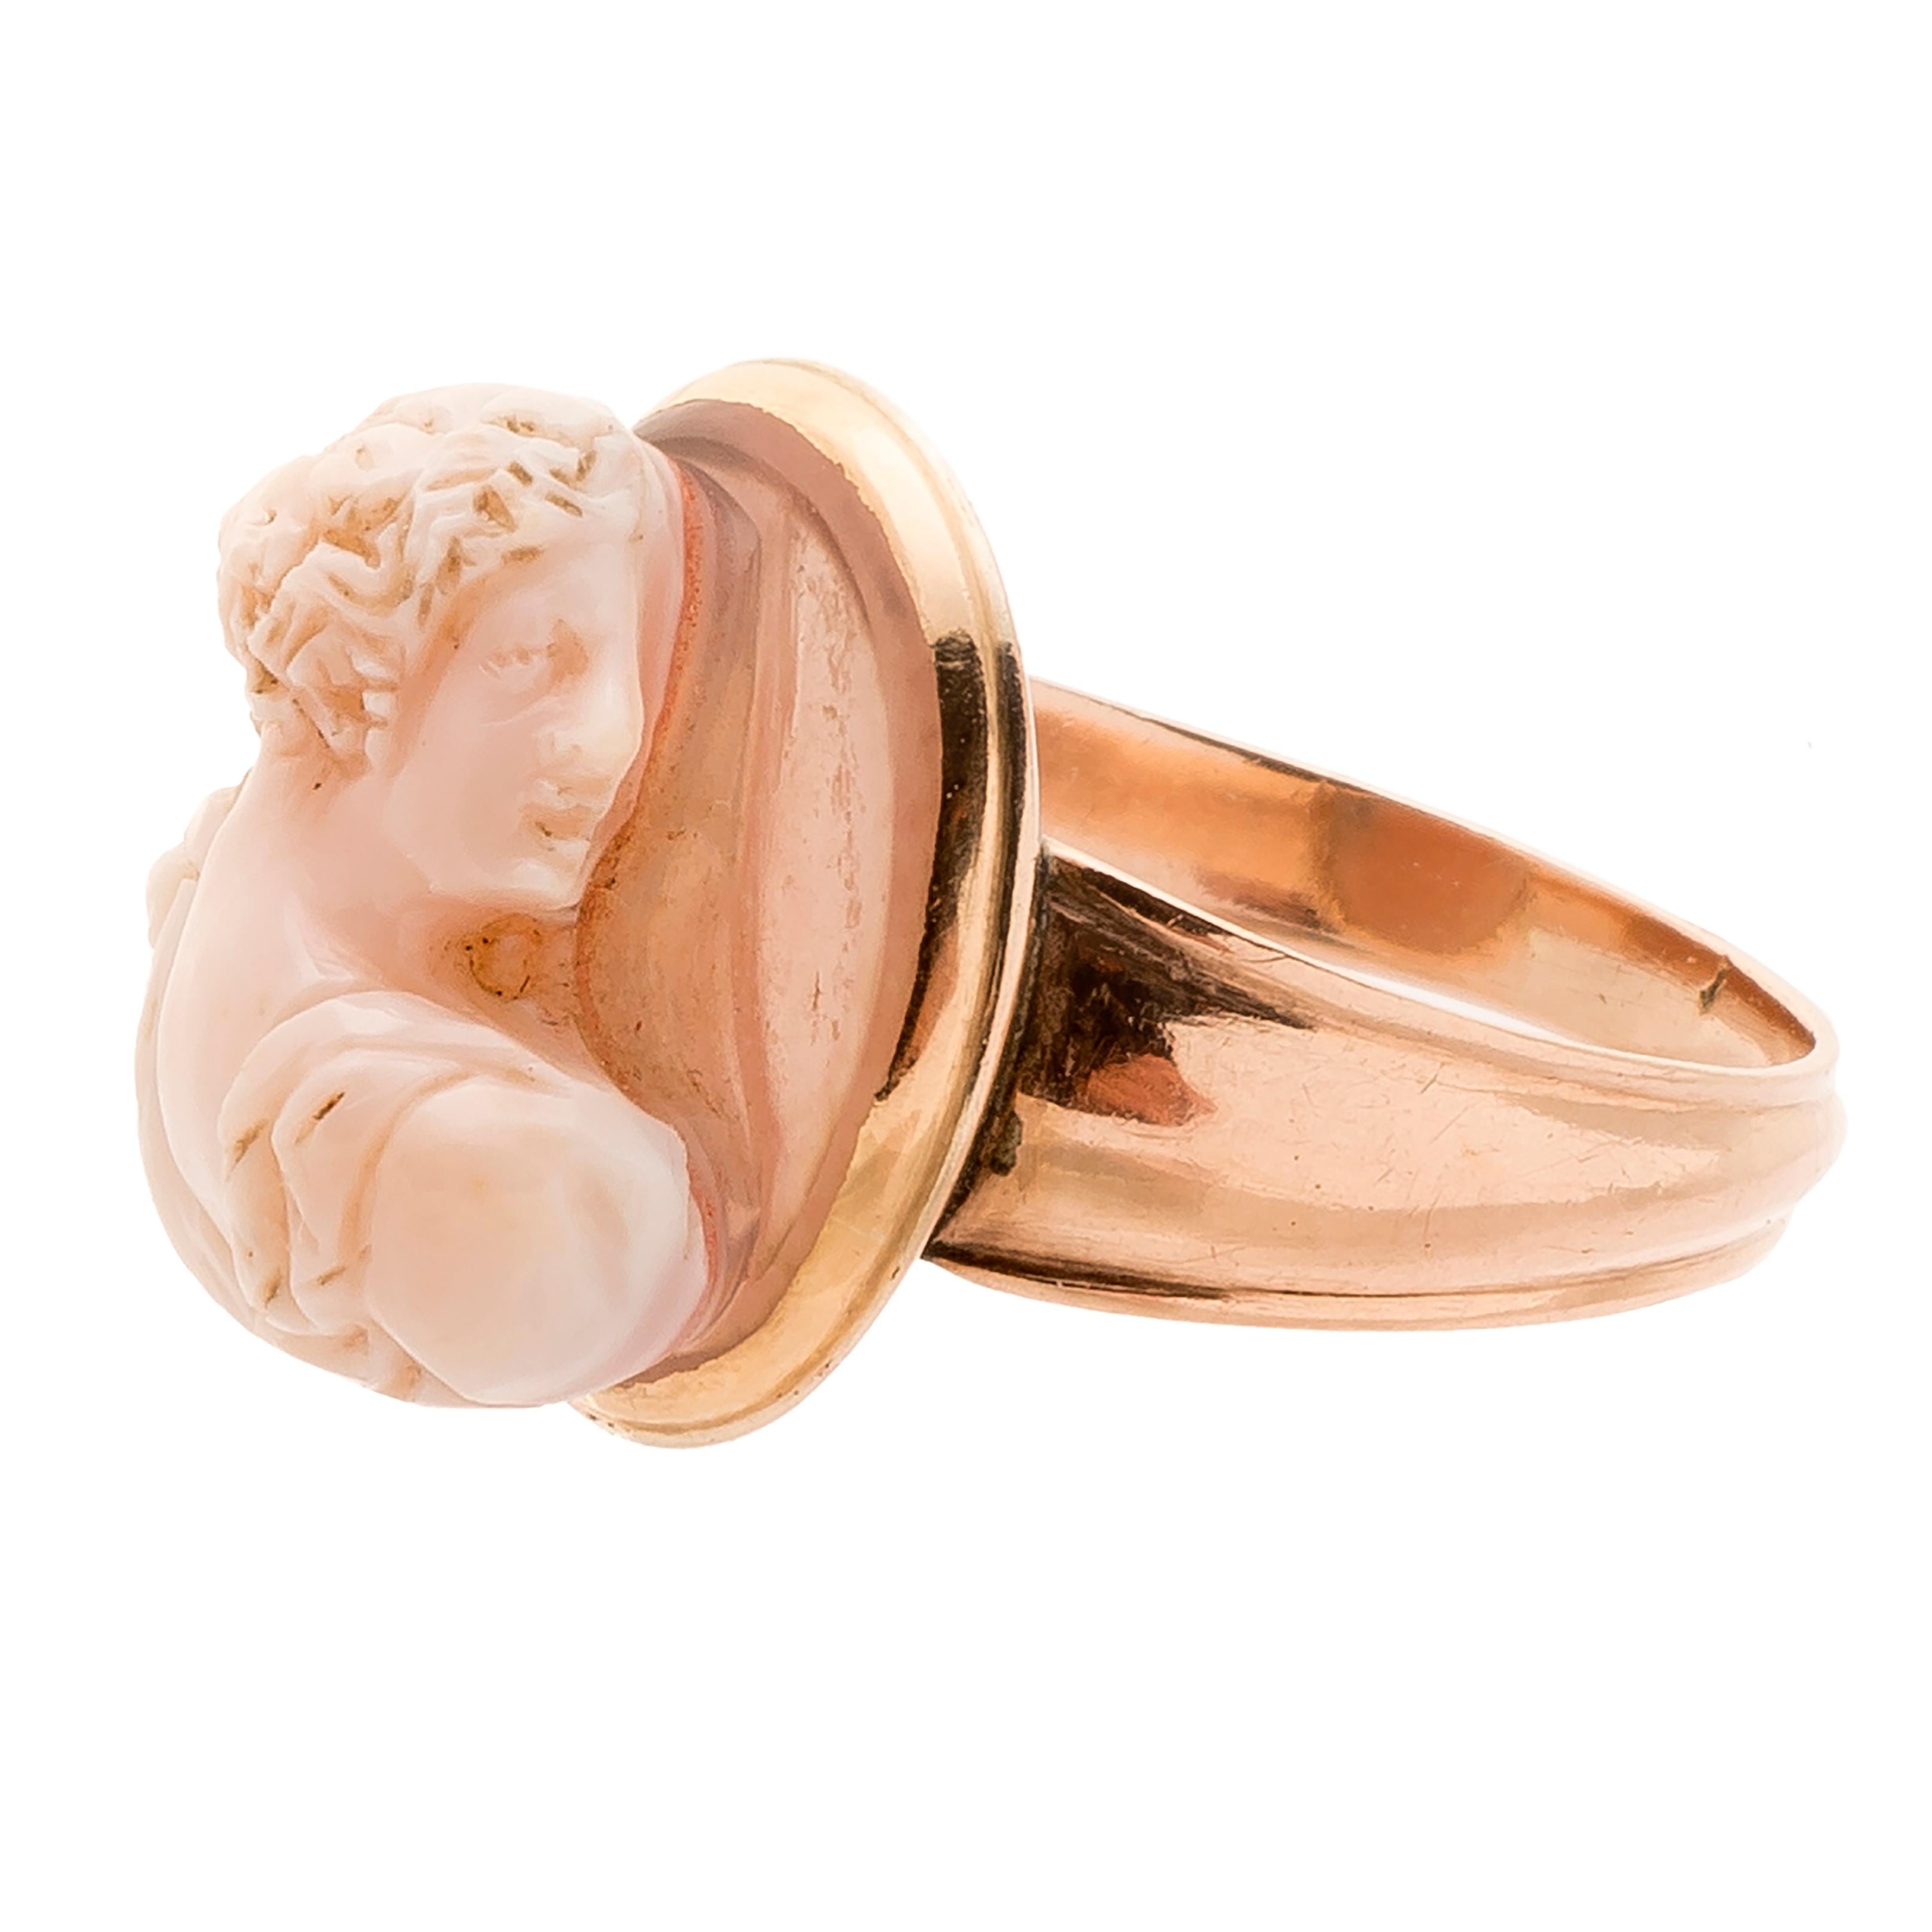 Ring with Renaissance cameo 
Probably Northern Italy, cameo late 16th-early 17th century; ring: second half 18th century  
Gold, sardonyx cameo (layered orange and translucent white) 
Weight 3.8 gr.; circumference 53.82 mm.; US size 6.75; UK size N